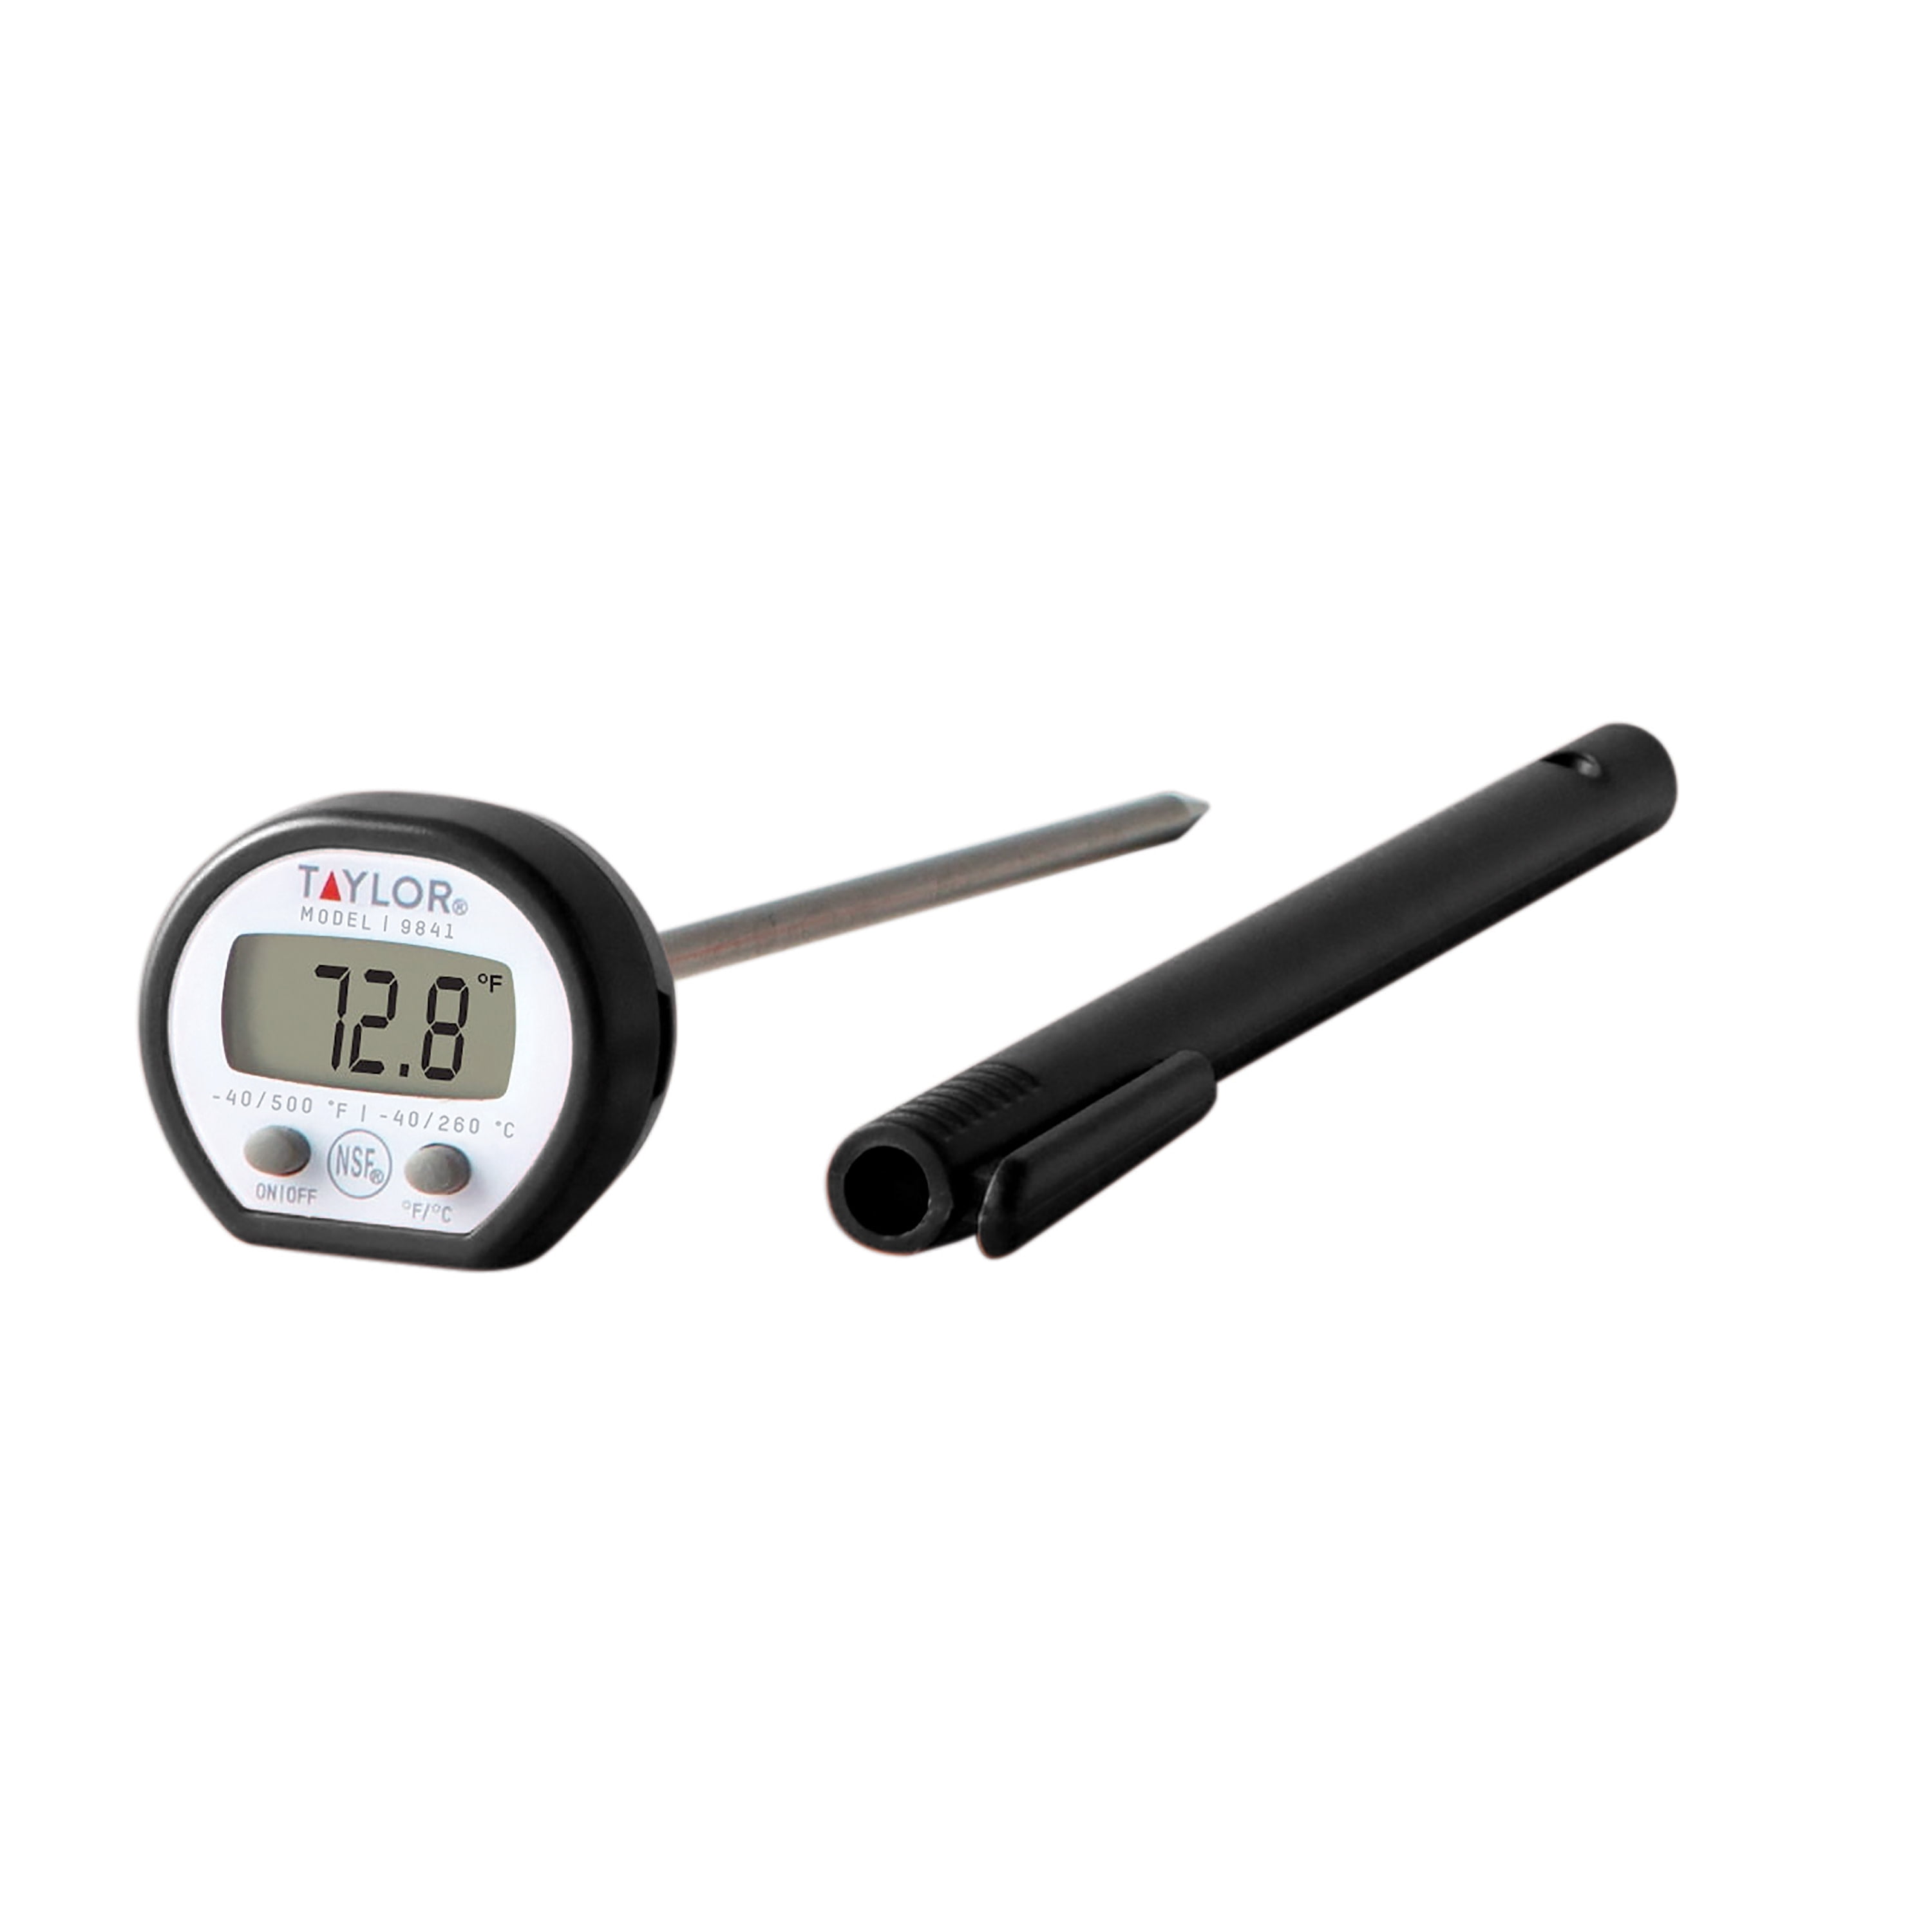 Taylor 9847n66 Rapid Response Digital Kitchen Cooking Thermometer Waterproof for sale online